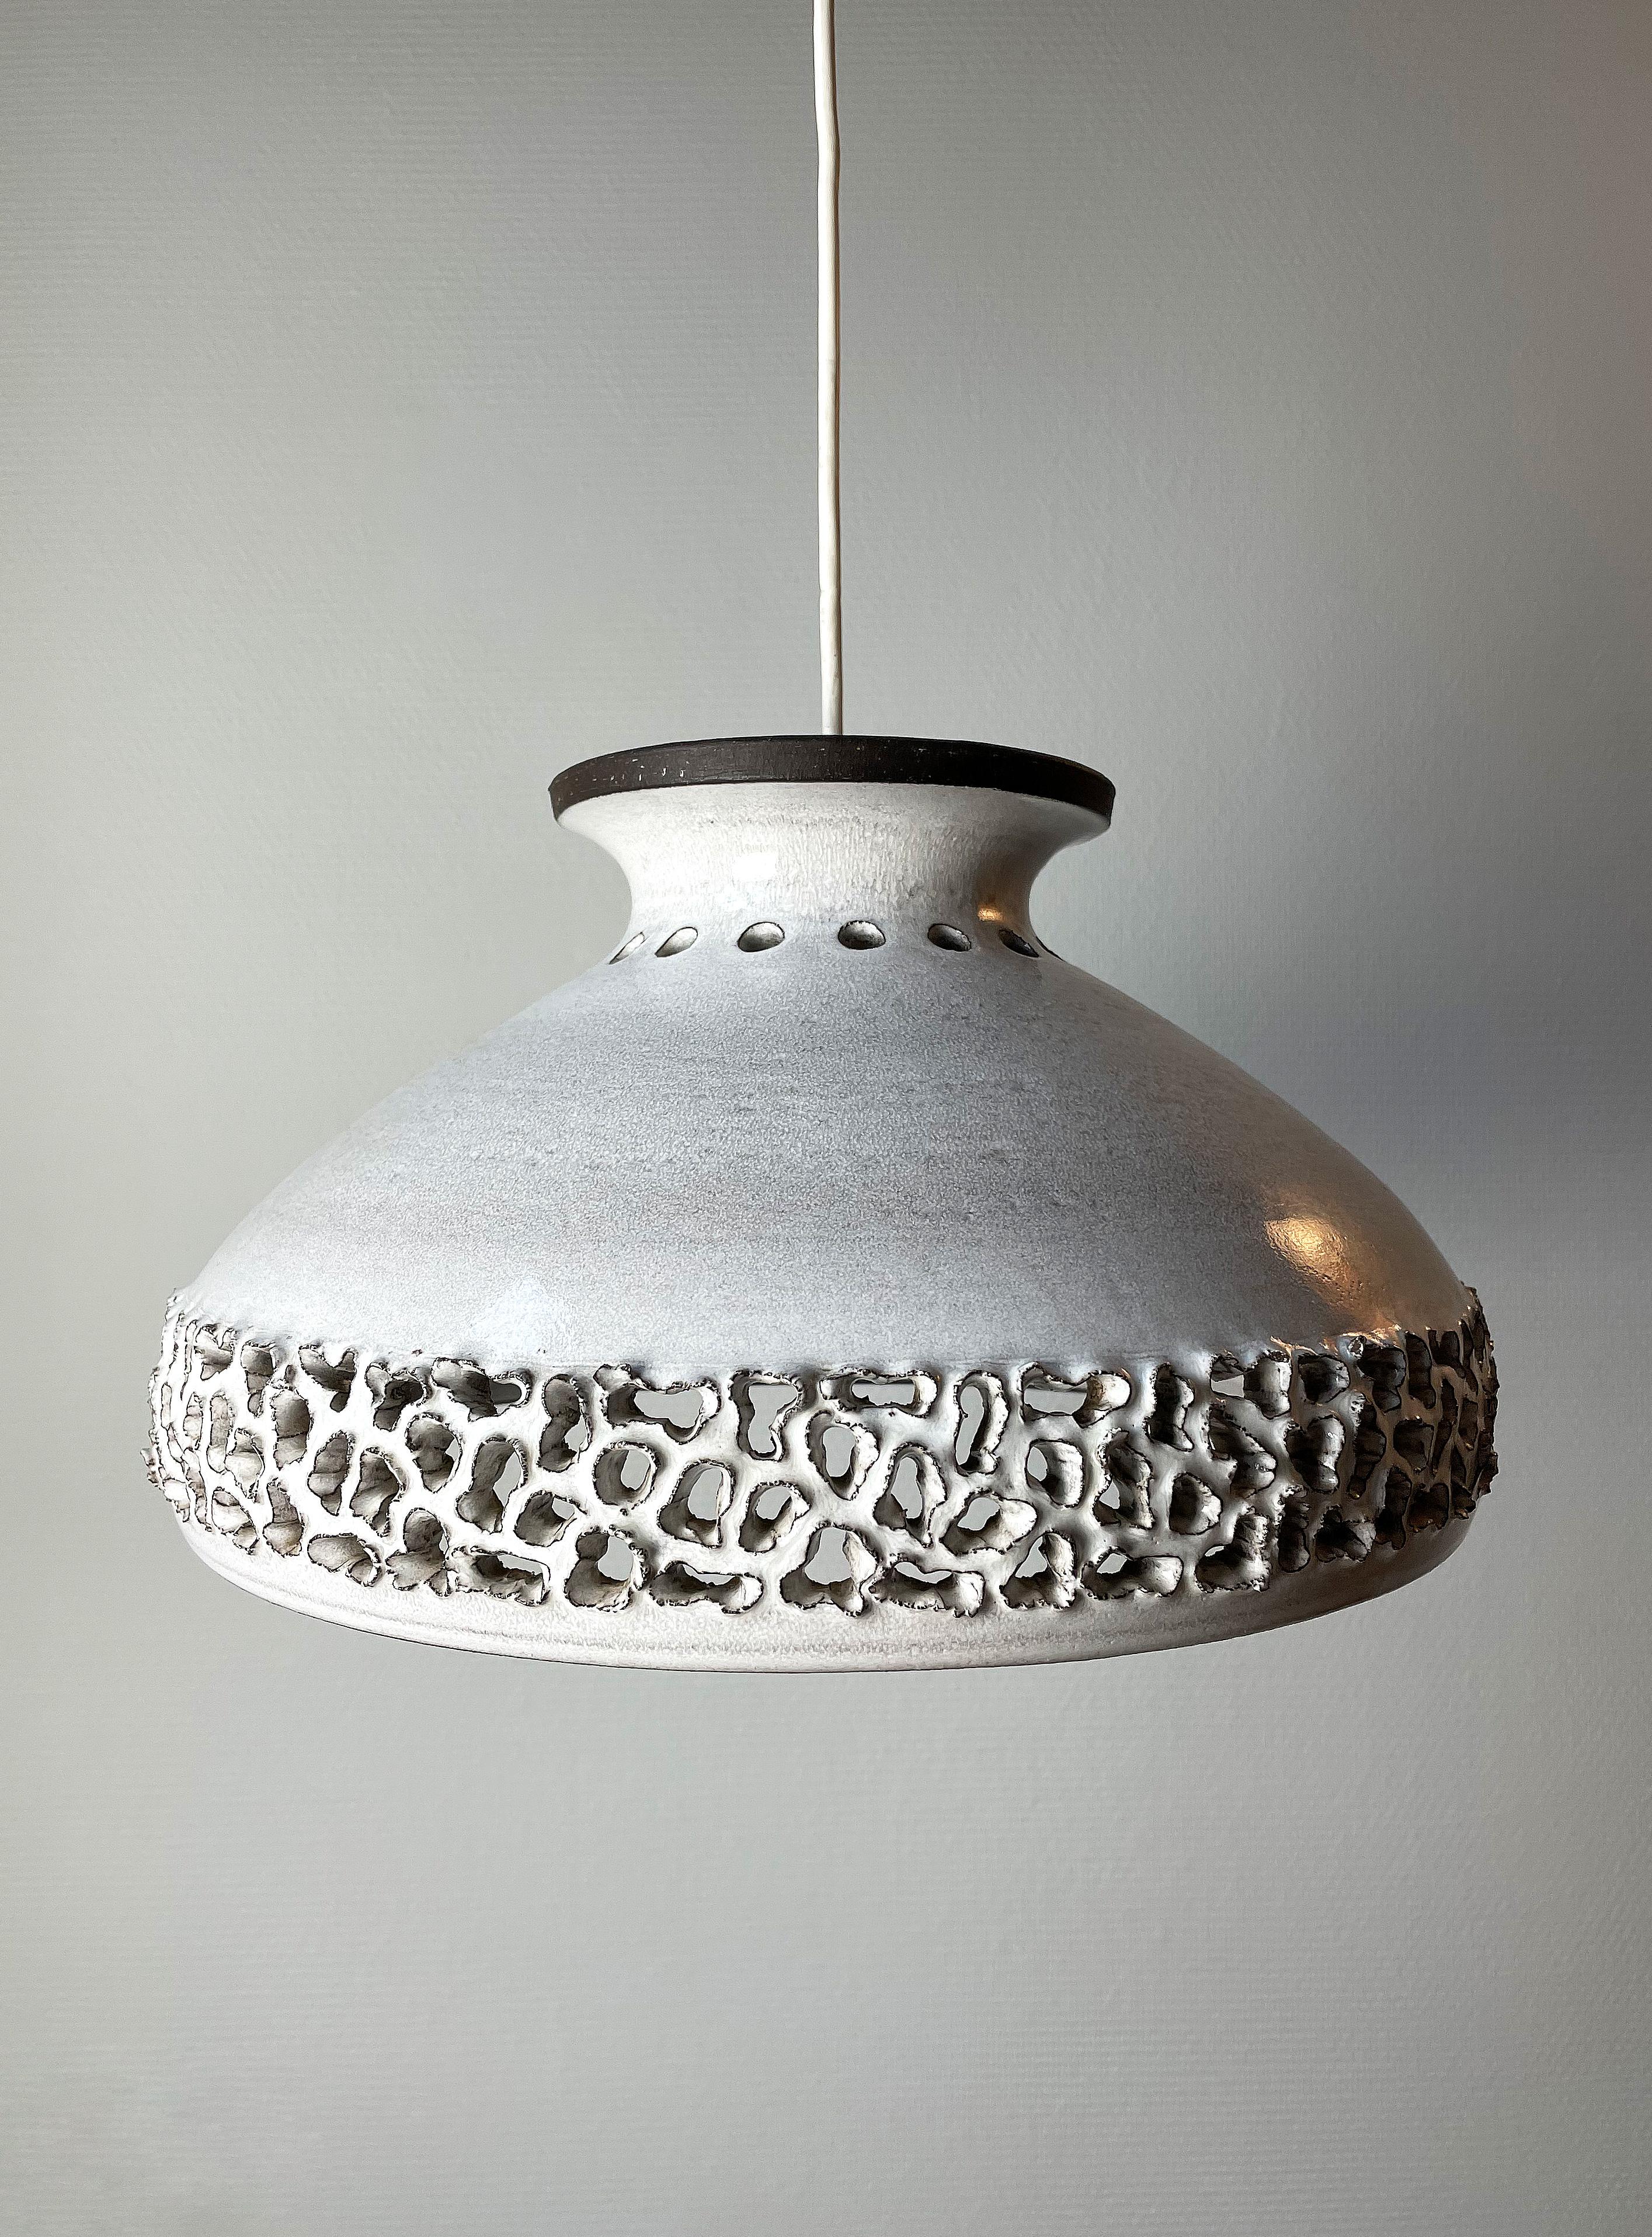 Large, stunning, open base, handmade ceramic pendant. Rustic perforations showcasing the ceramic material and letting the light out around the base. Circle perforations around and on the top. Light grey glaze with unglazed dark brown accents.